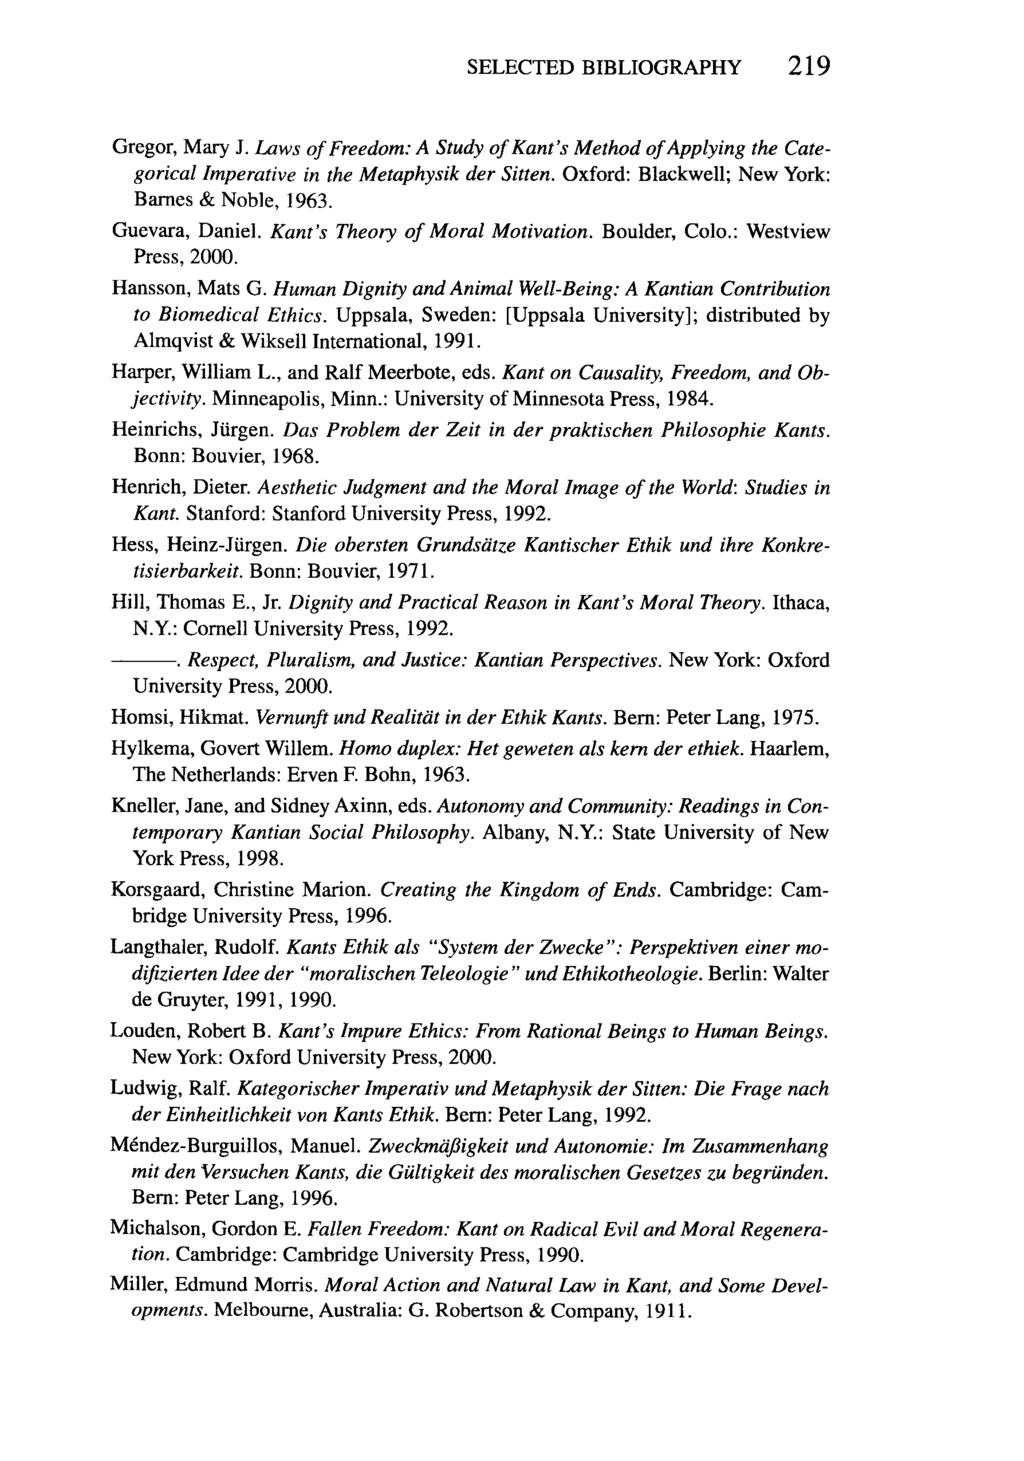 SELECTED BIBLIOGRAPHY 219 Gregor, Mary J. Laws of Freedom: A Study of Kant's Method of Applying the Categorical Imperative in the Metaphysik der Sitten.